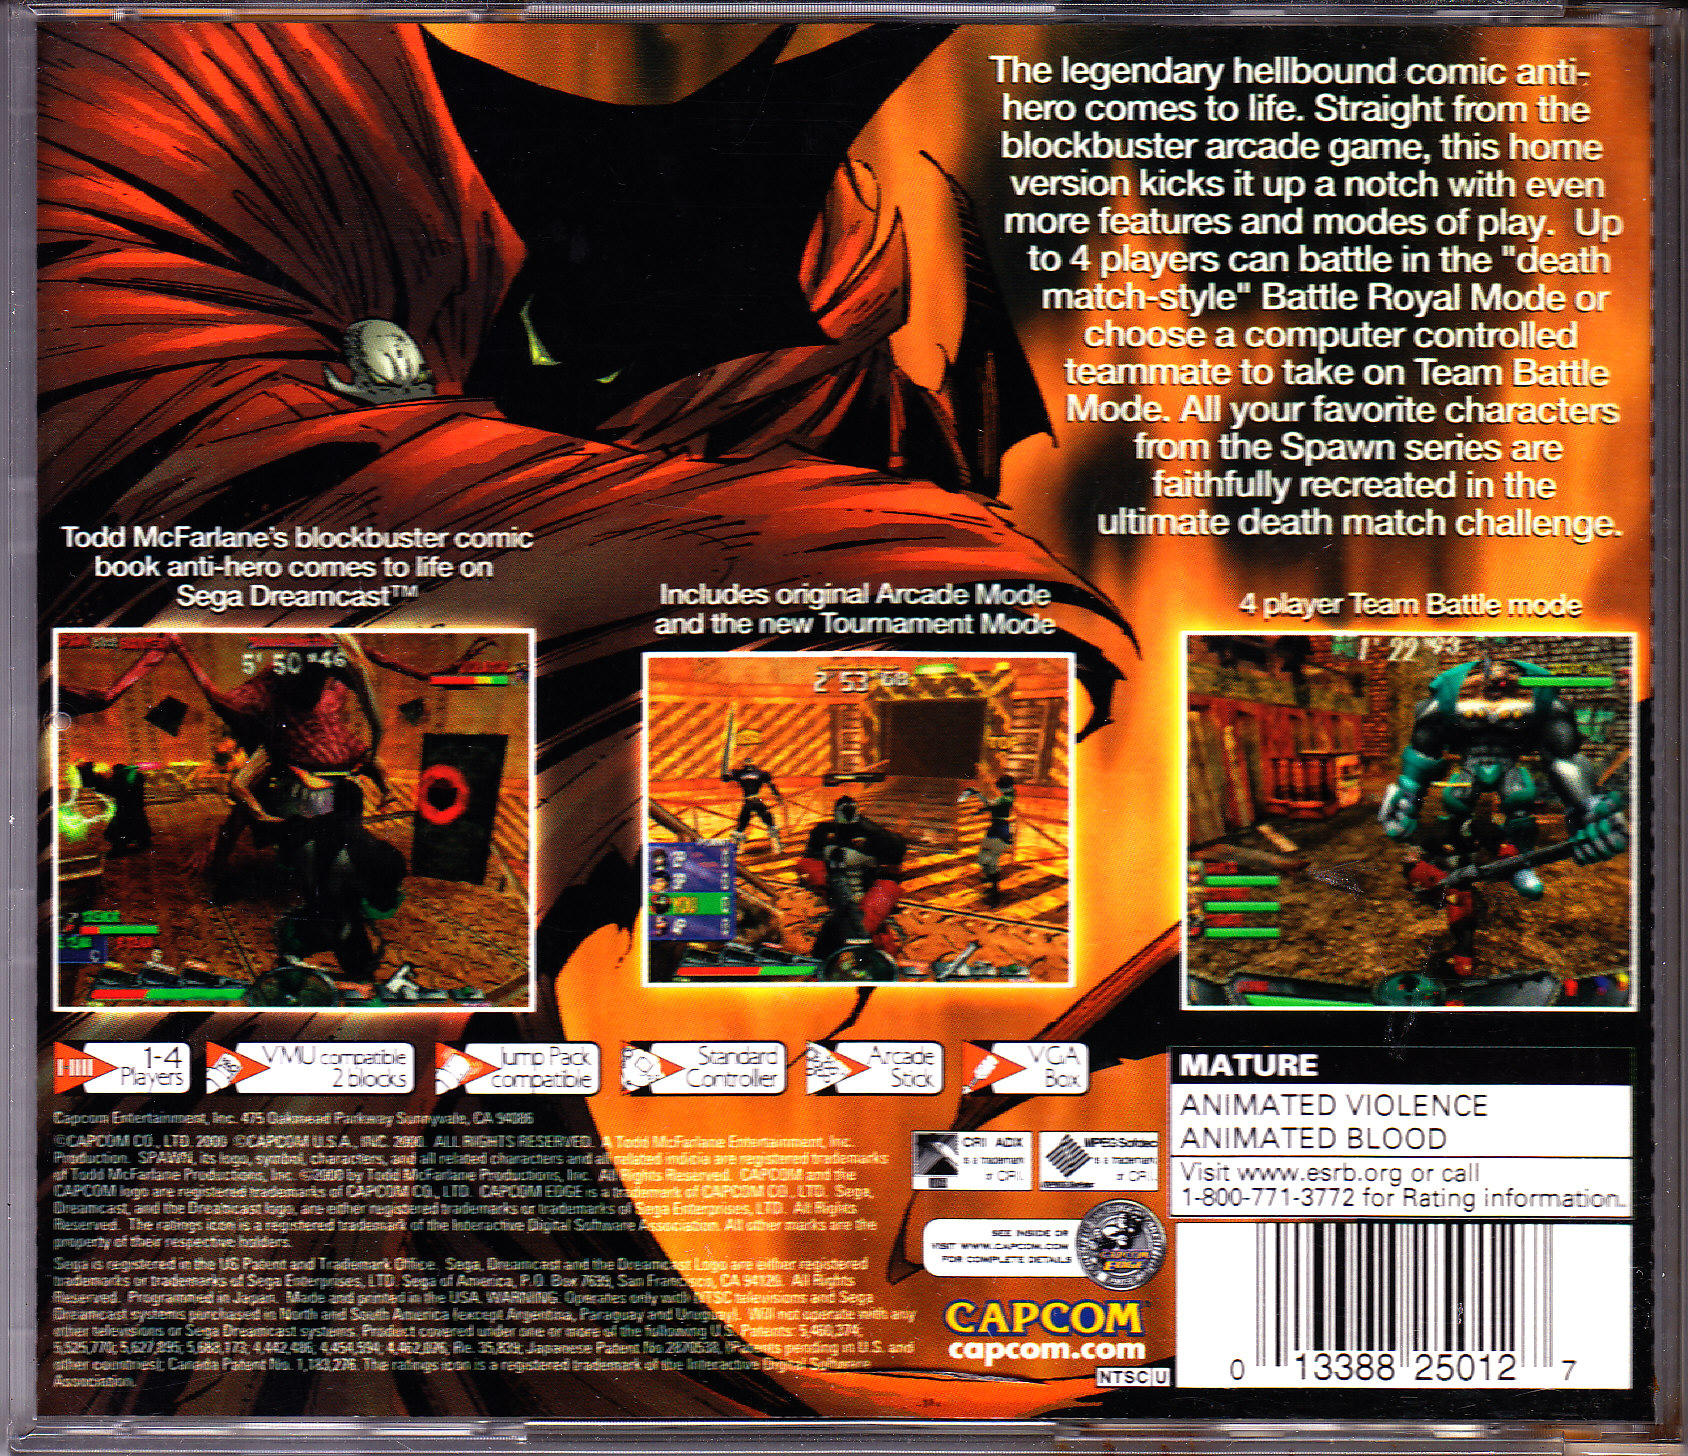 Index of /Video Games/Collection/Sega Dreamcast/Scans/Full Size